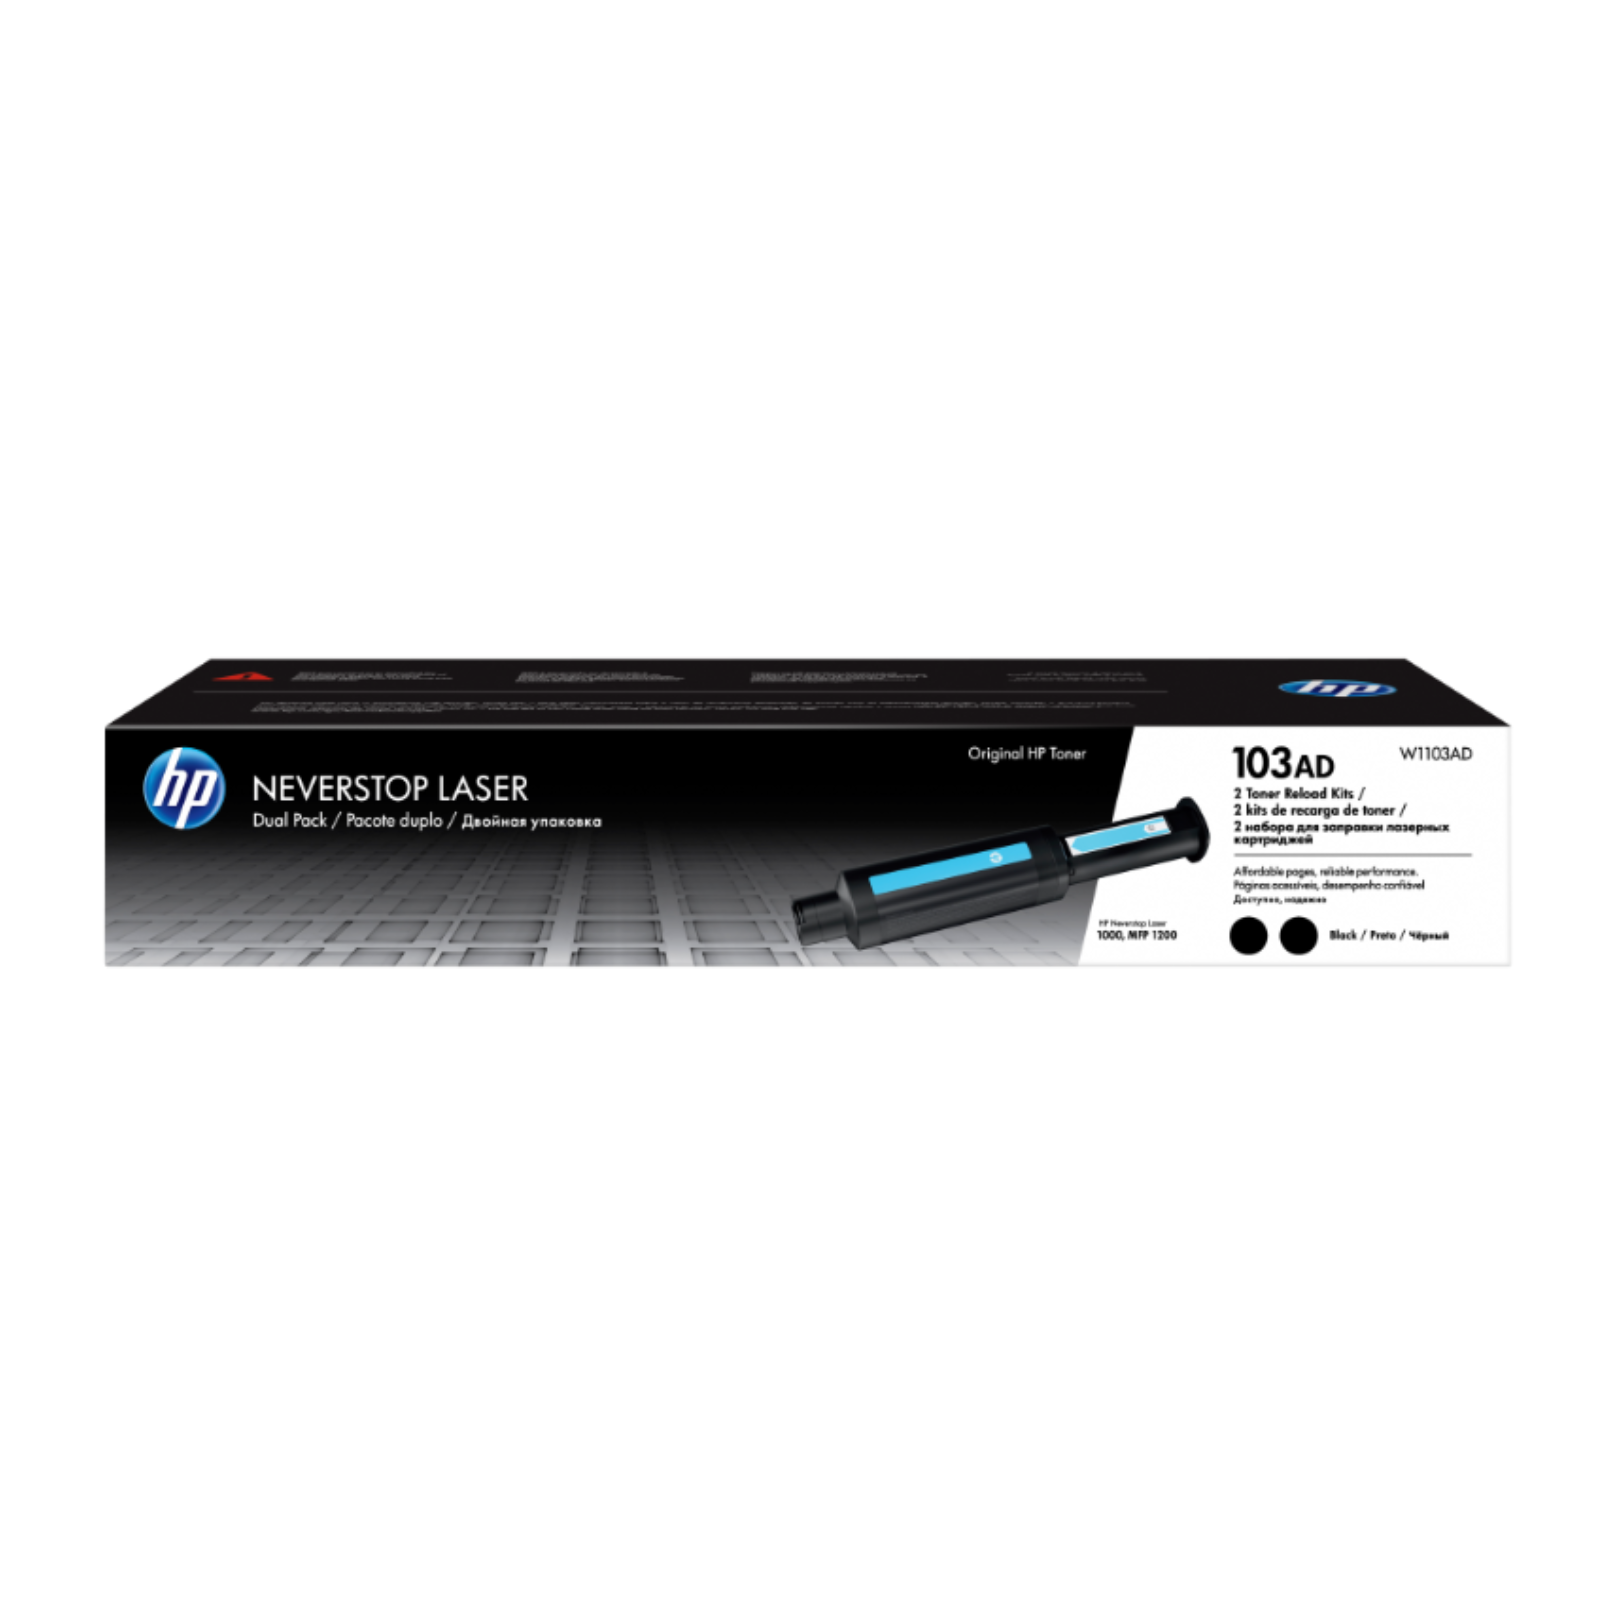 Pack x2 Toner HP 103A Negro (W1103AD) Laser Neverstop 1000/1200 2500 Pag. C/U